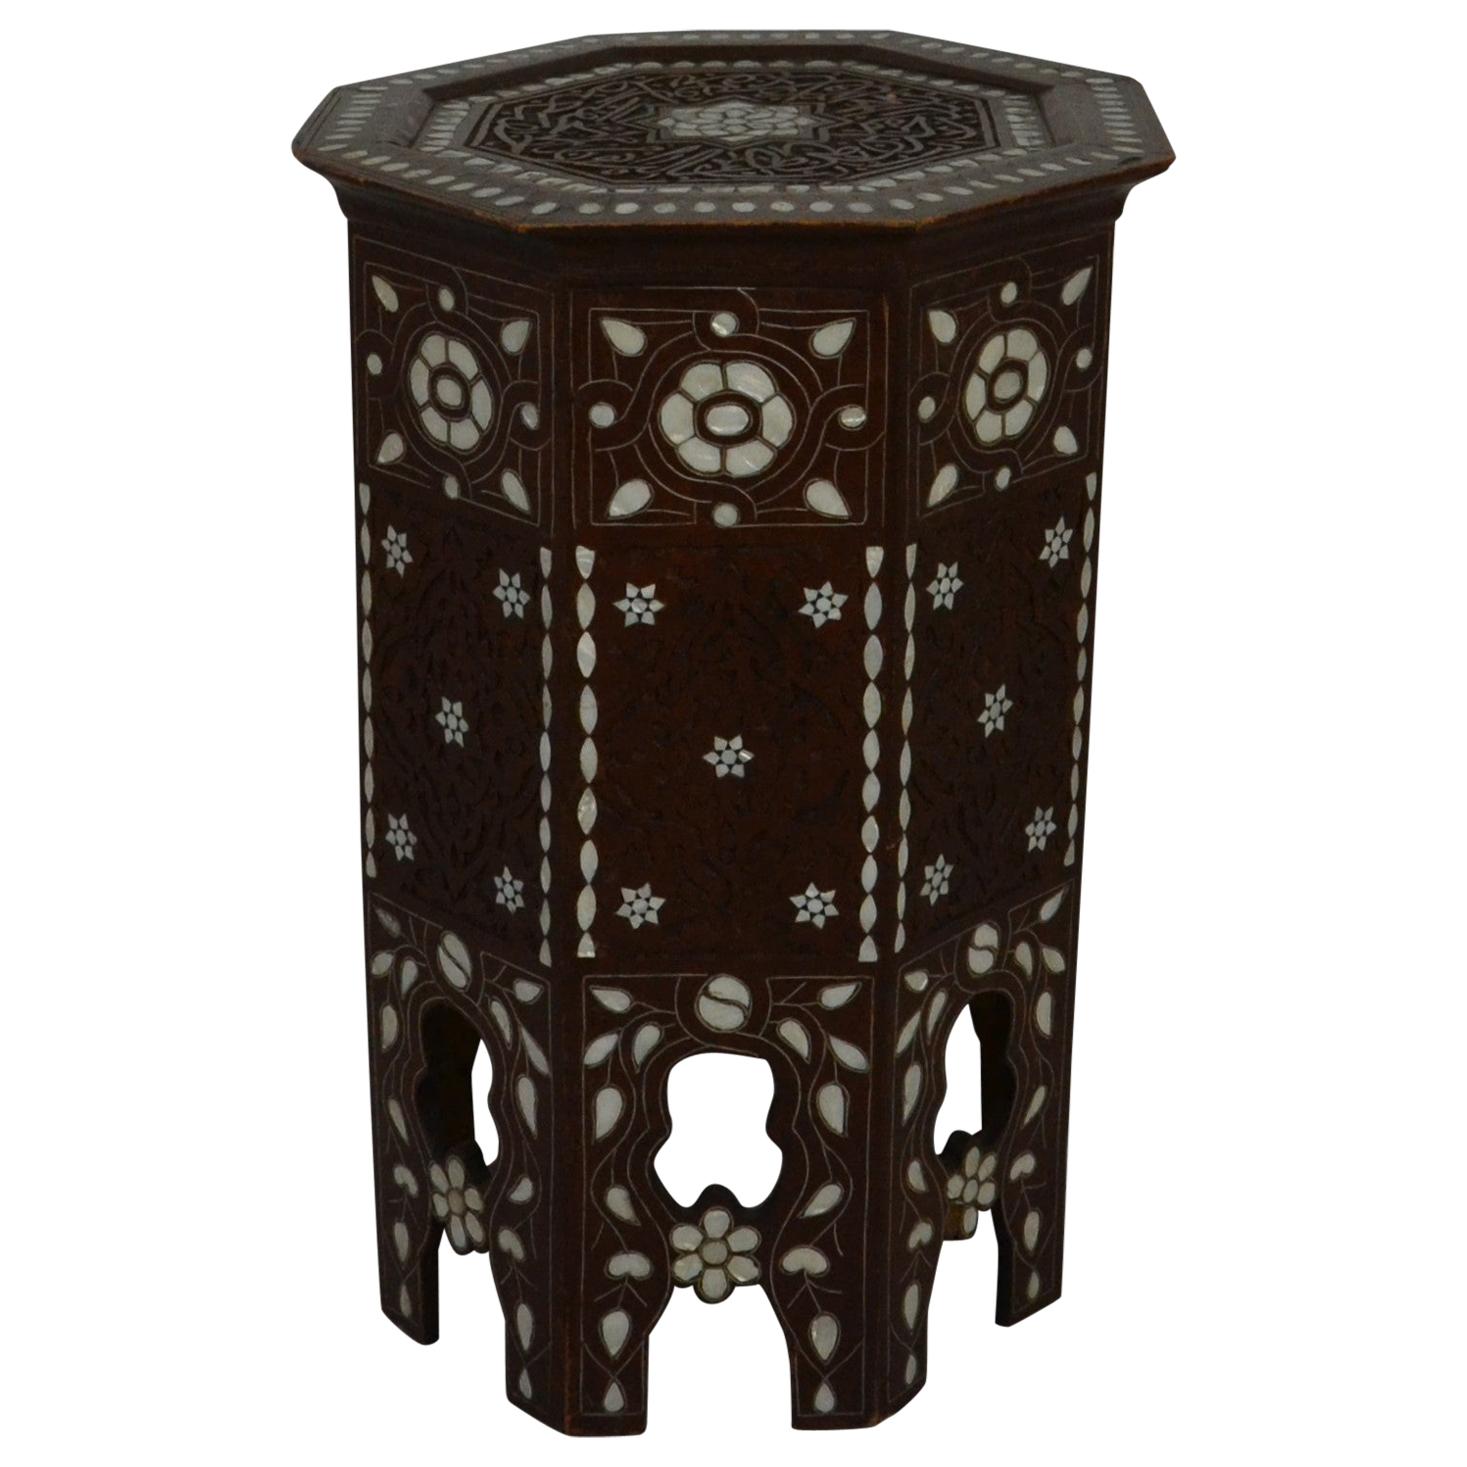 Syrian End Table with Mother of Pearl Inlays